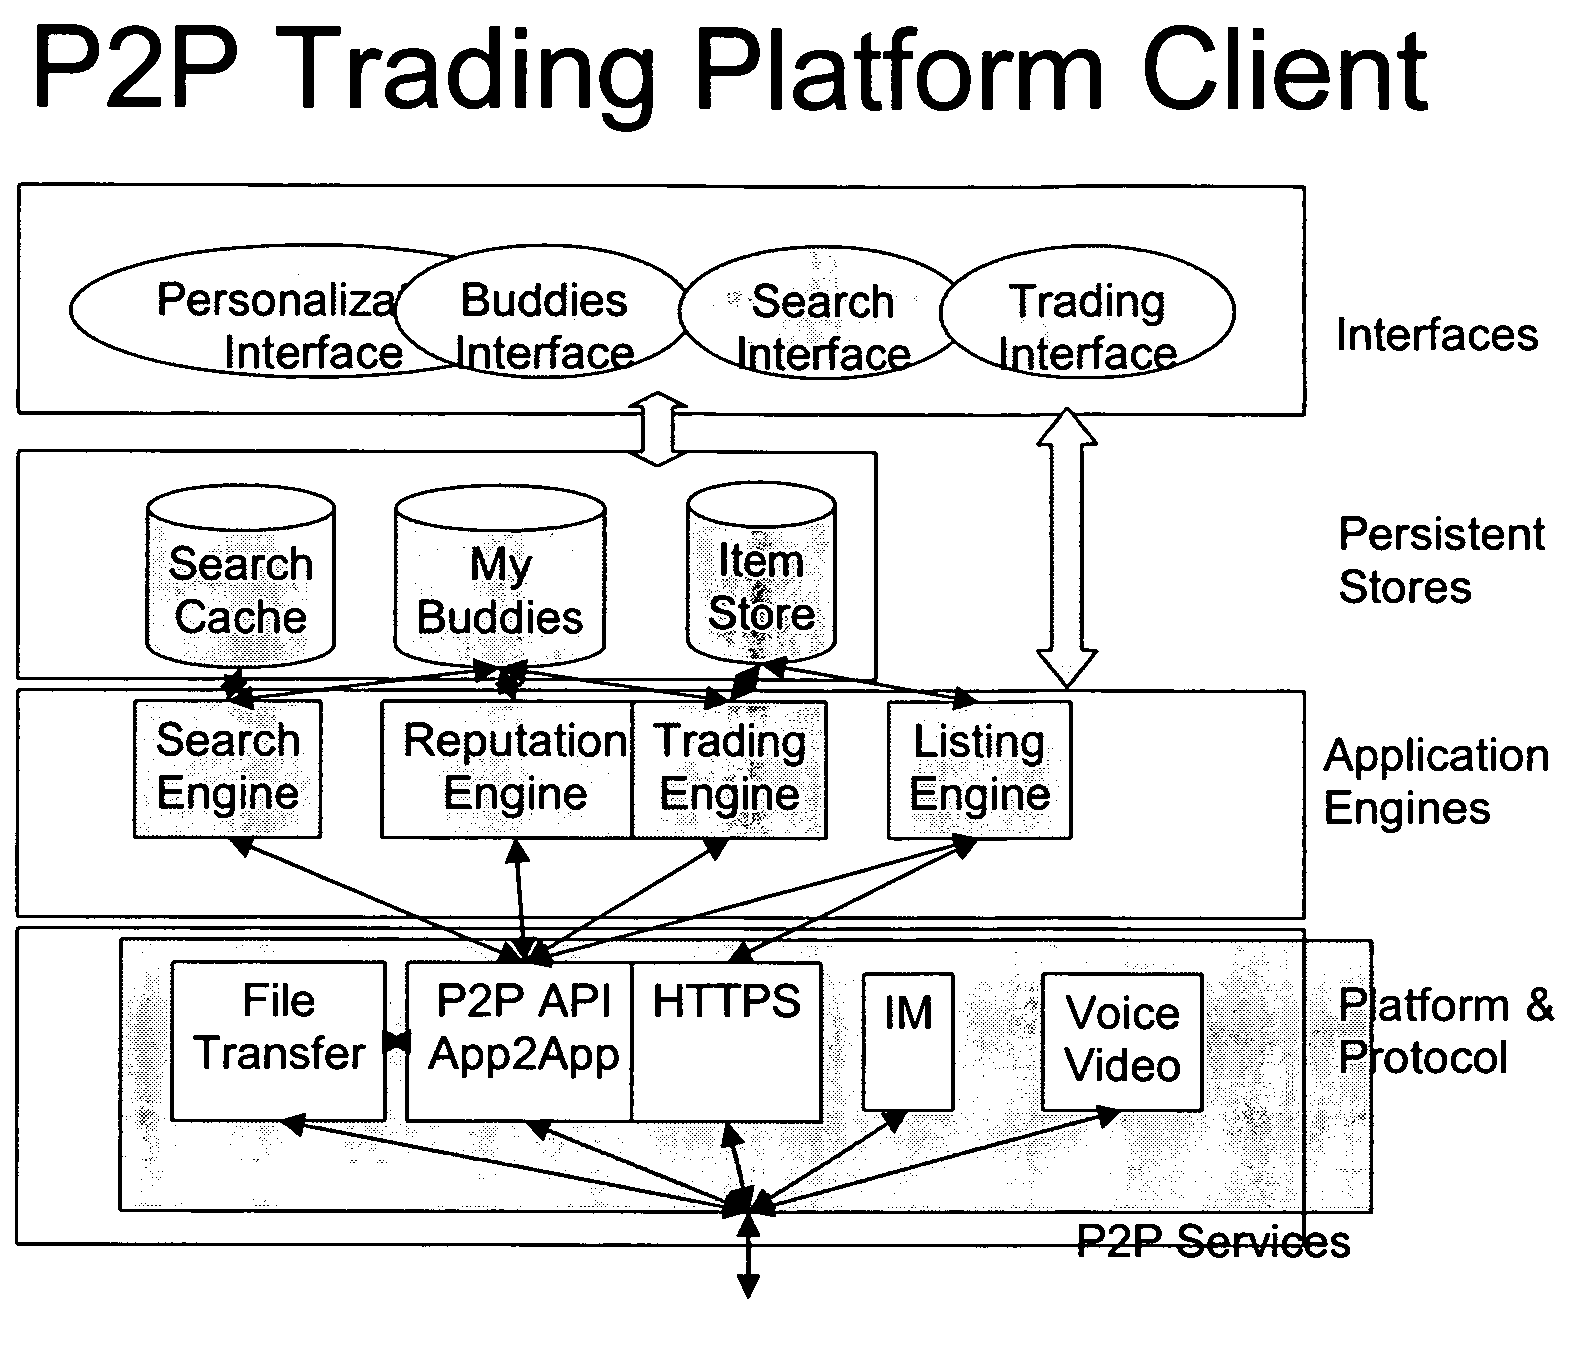 Peer-to-peer trading platform with search caching